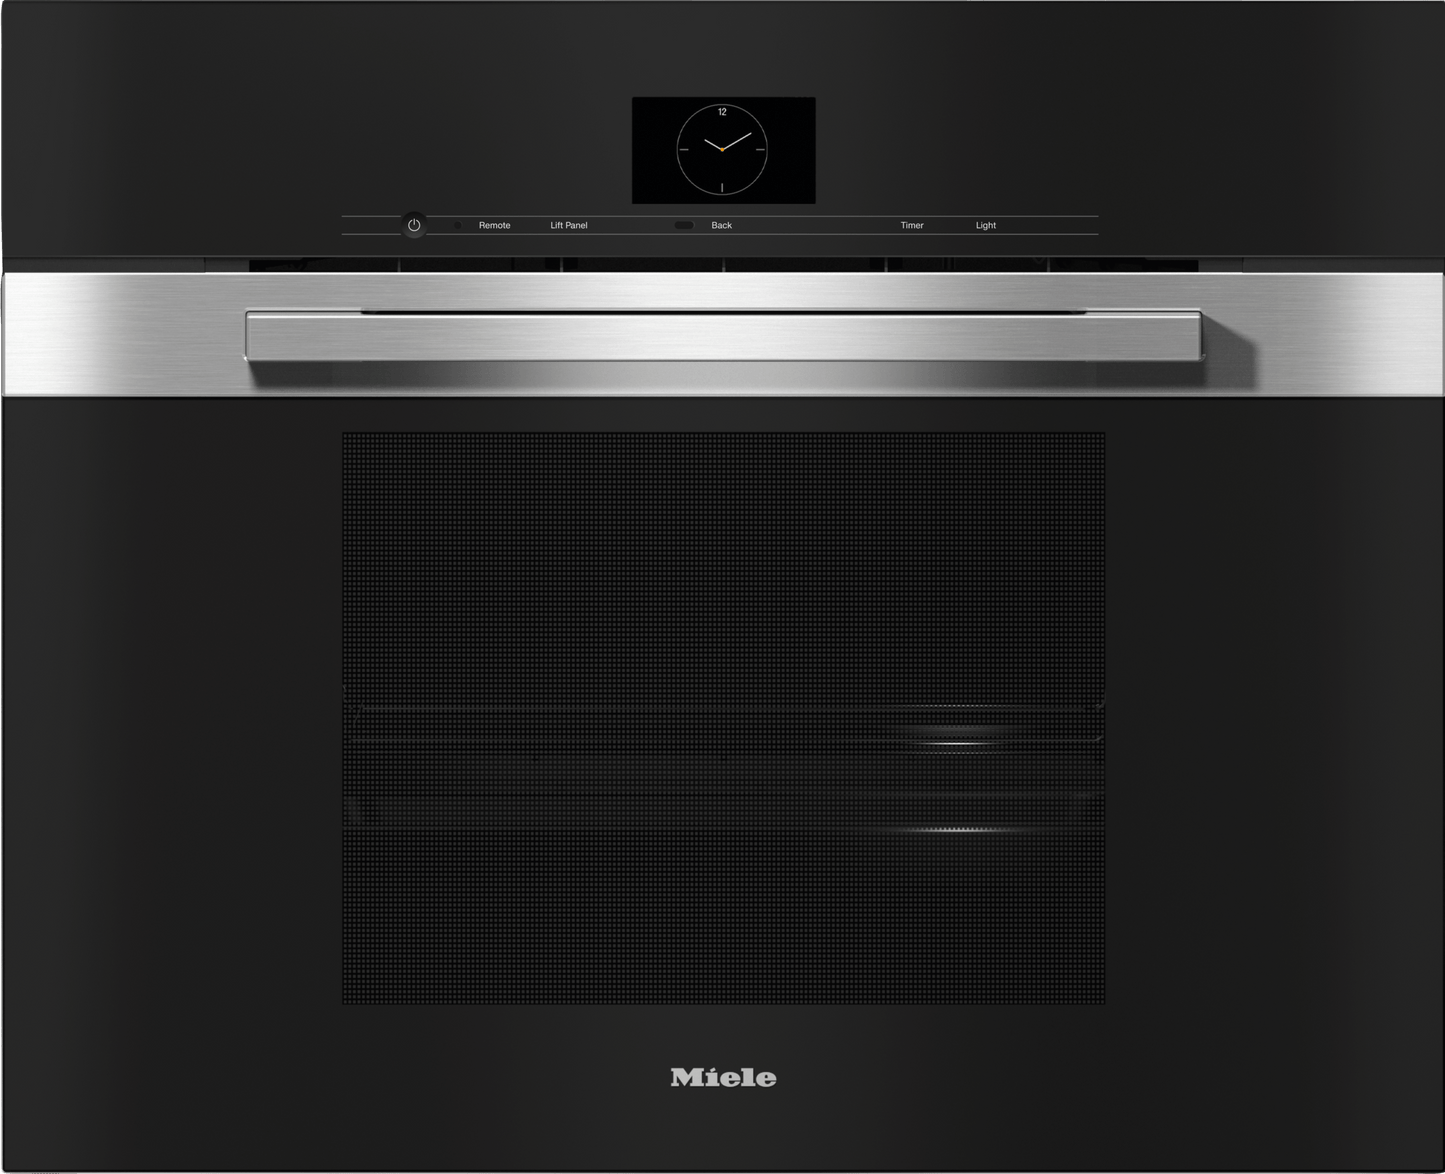 Miele DGC7685  STAINLESS STEEL  30" Combi-Steam Oven Xxl With Directwater Plus For Steam Cooking, Baking, Roasting With Roast Probe + Menu Cooking.